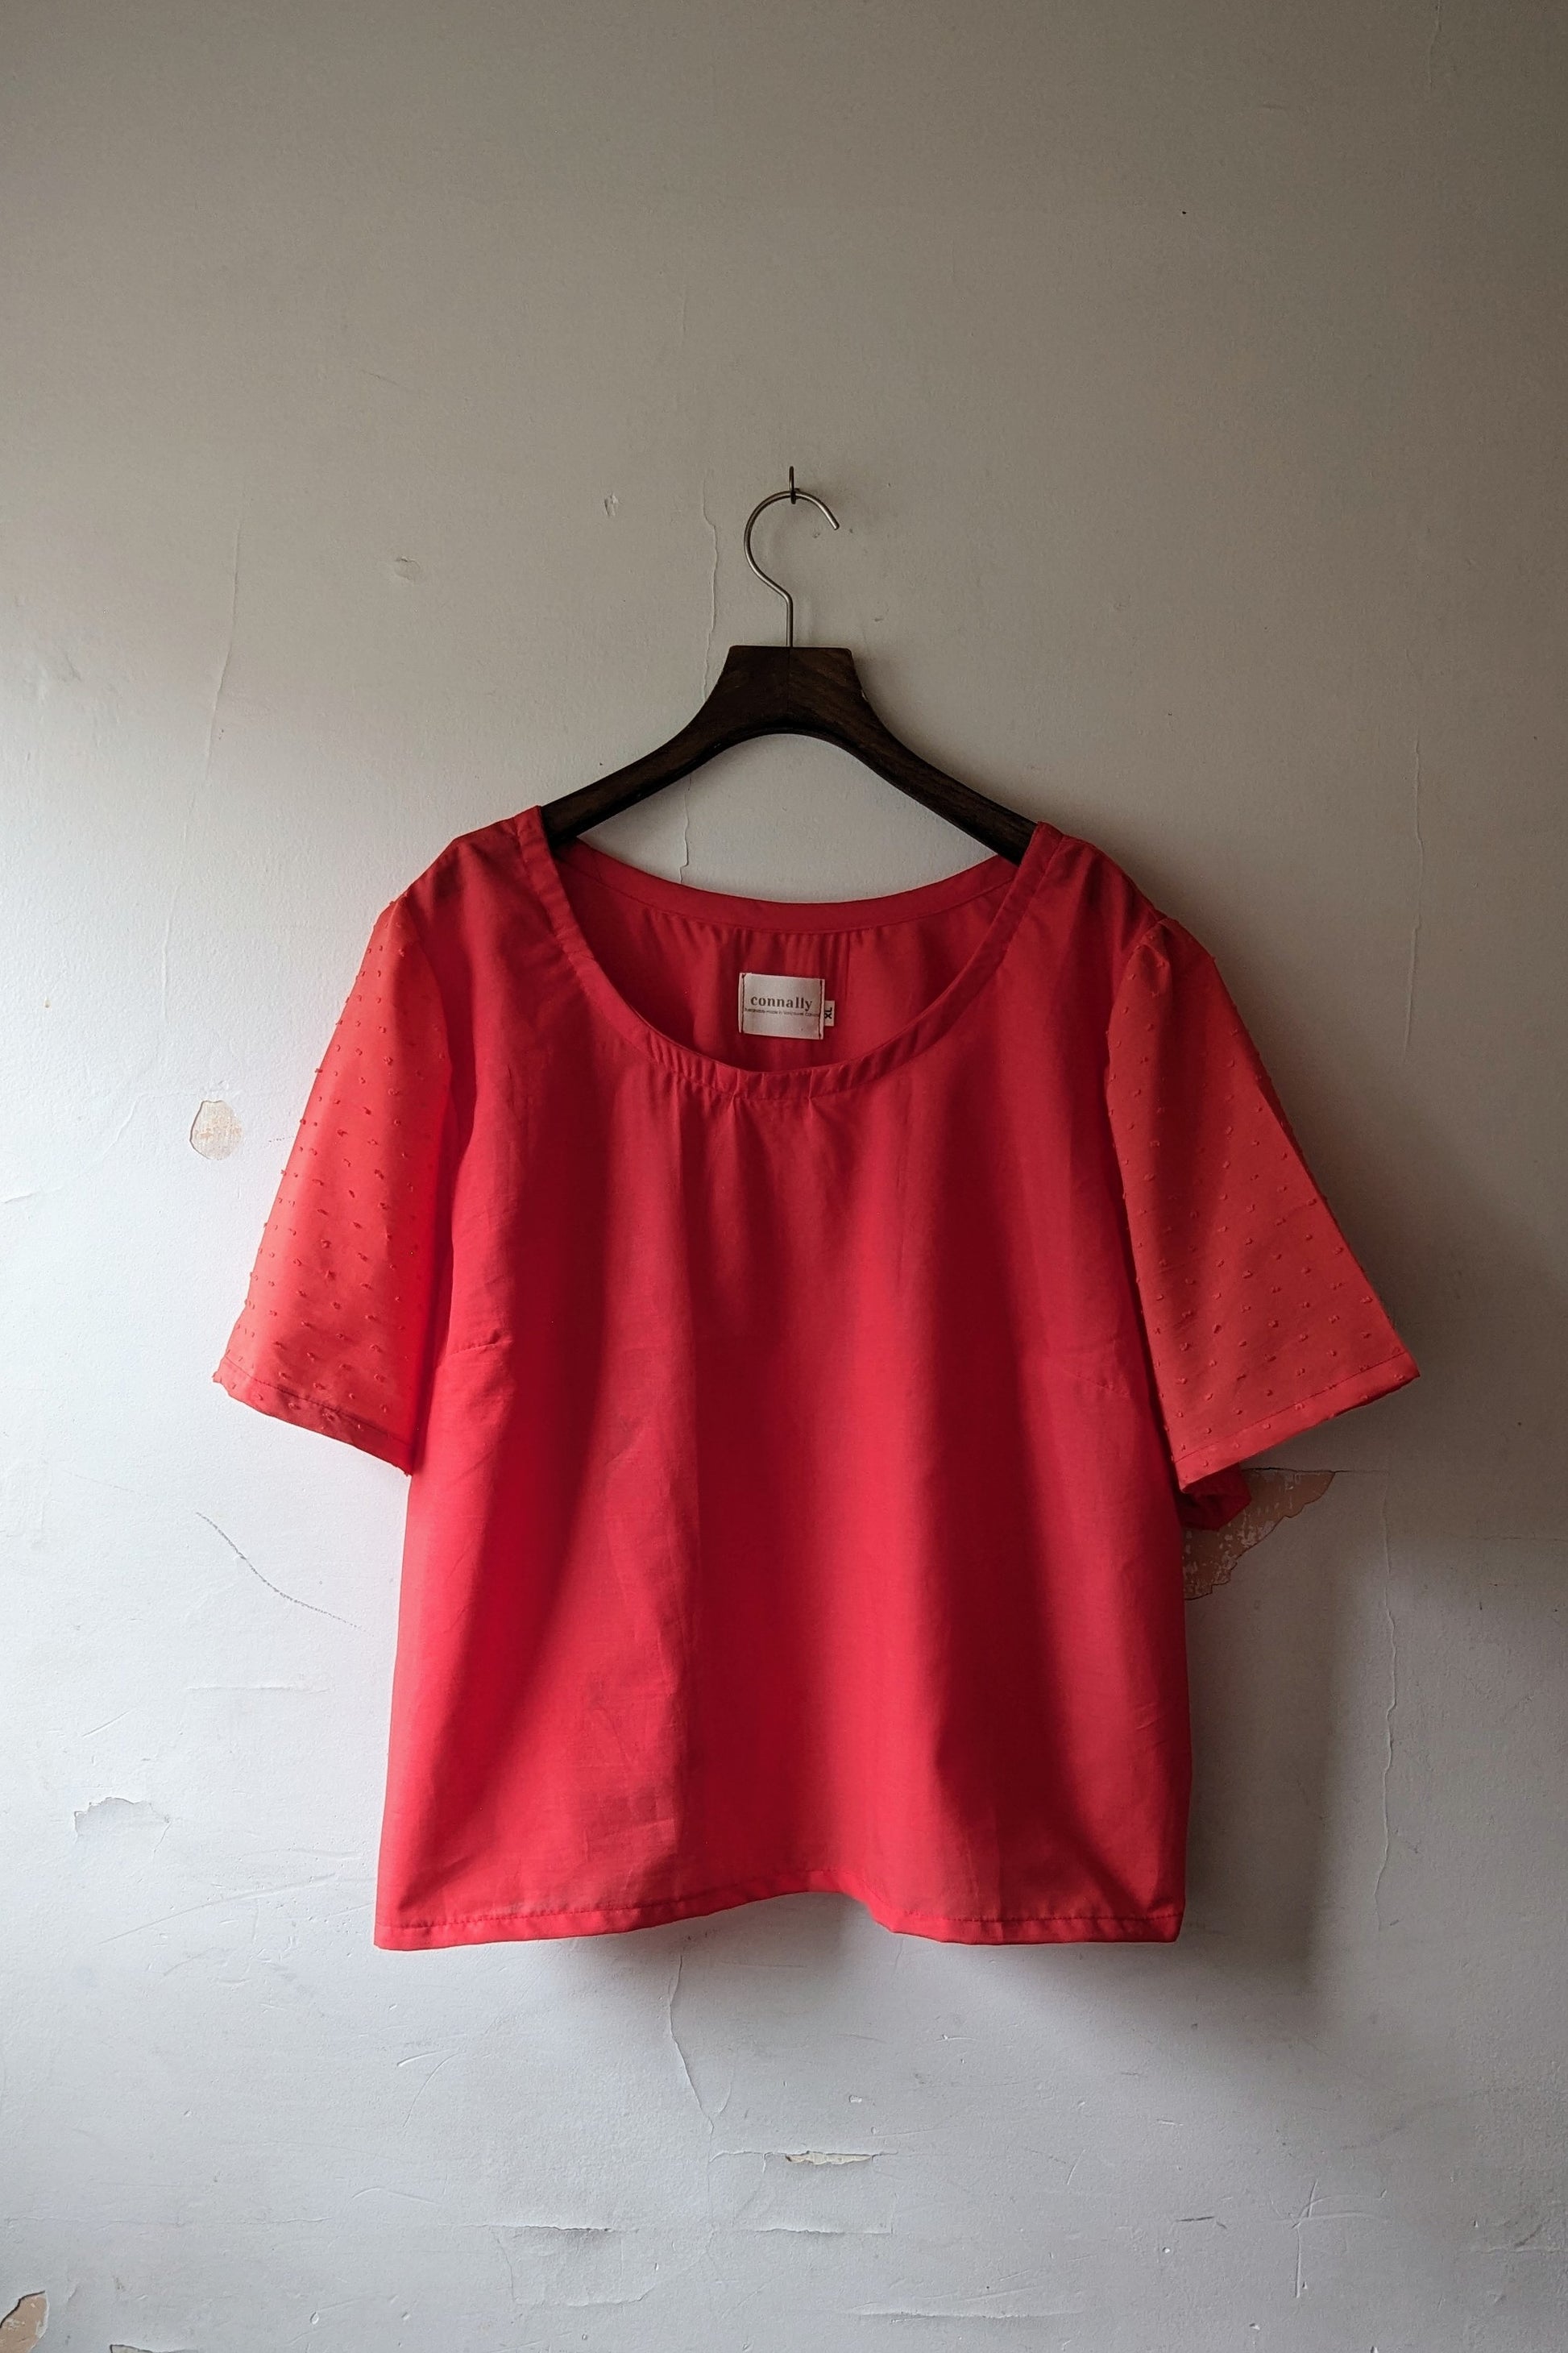 Penny Shirt with Puffed Sleeves in Red Cotton by Connally Goods